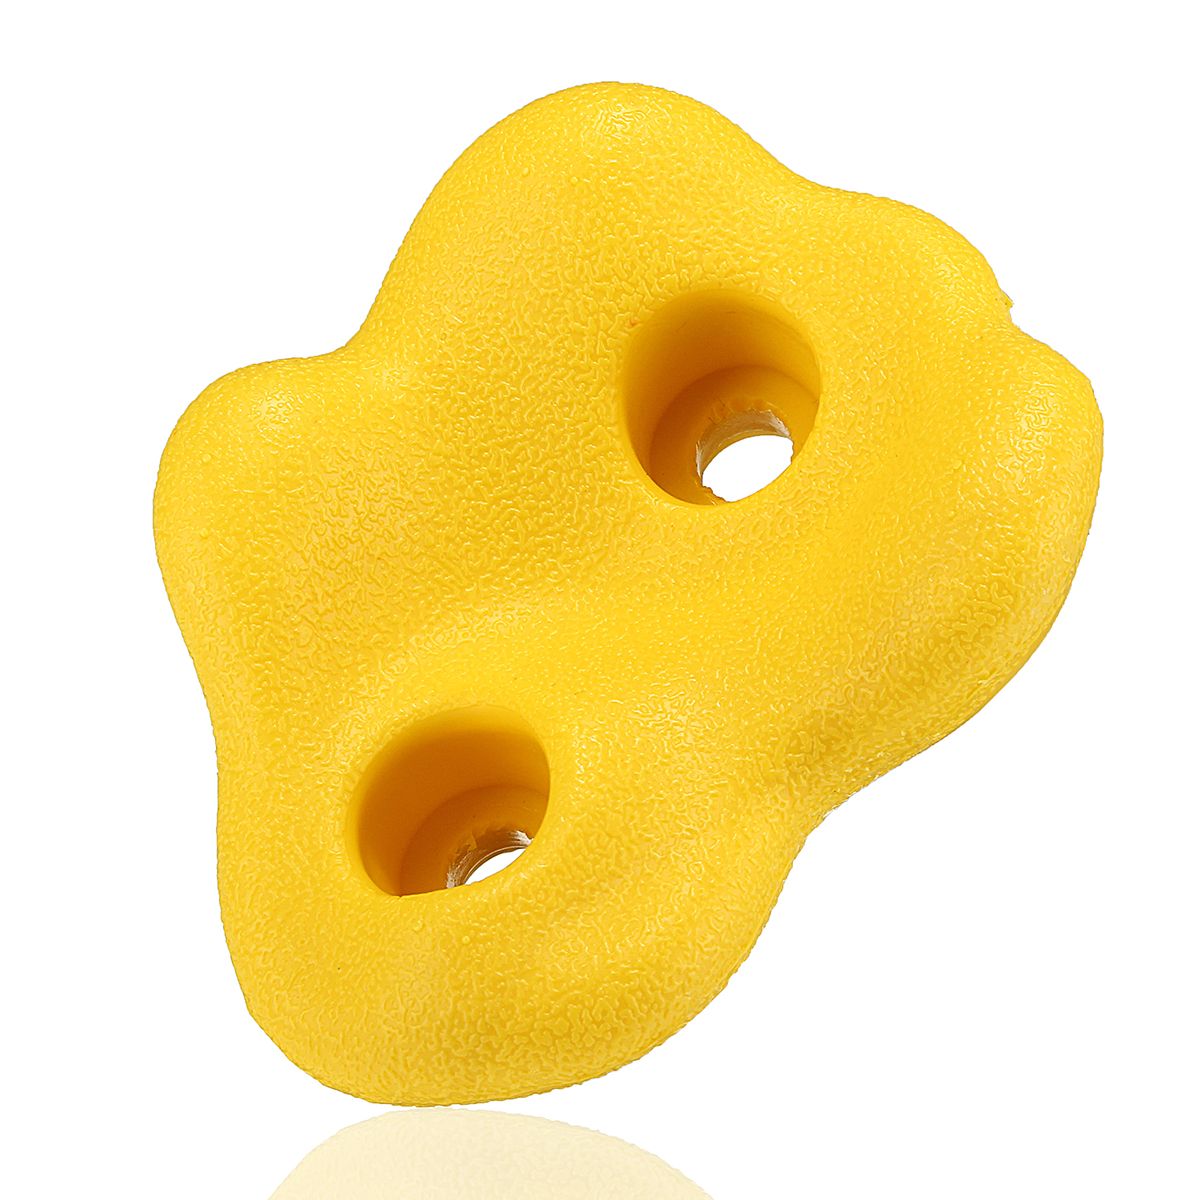 Yellow-Climbing-Rock-Wall-Textured-Bolt-Grab-Holds-Grip-Stones-Indoor-Outdoor-Kid-Decorations-1529767